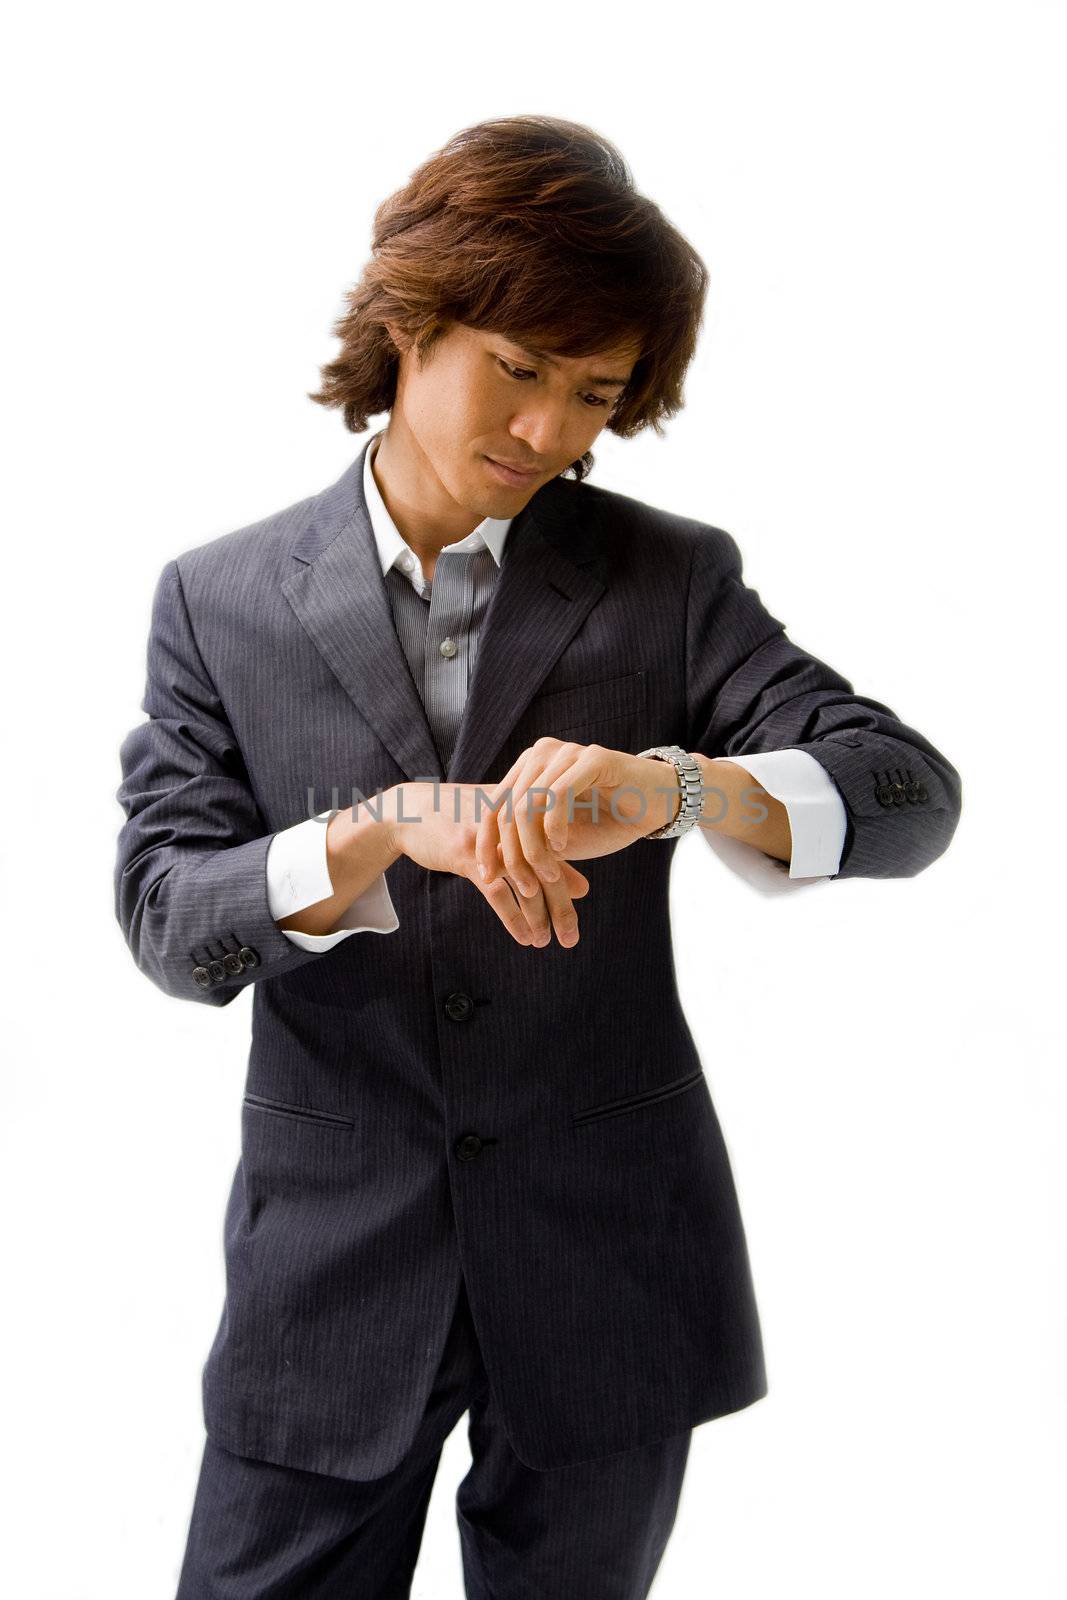 Young Asian business man dressed in a gray pinstripe suit checking time by looking at his watch, isolated